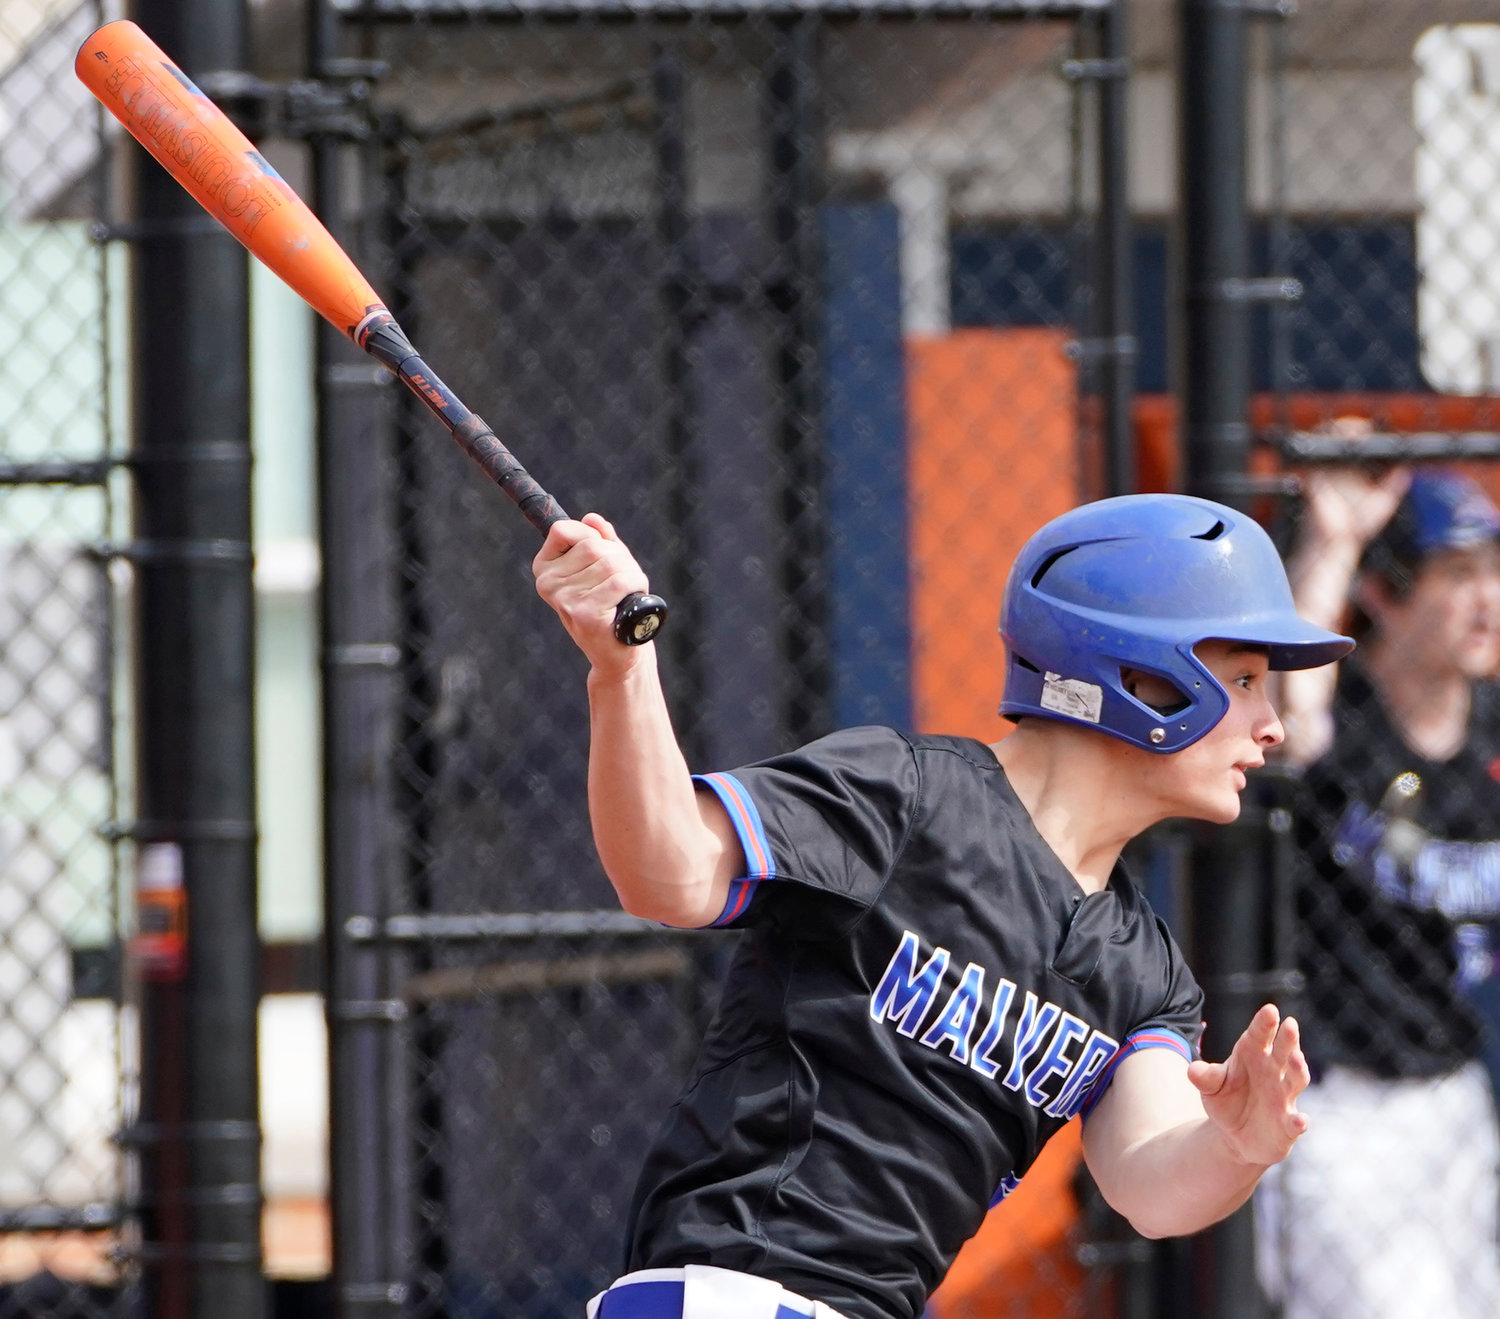 Senior third baseman Daniel Quaranto batted .444 this spring and led the 13-3 Mules in stolen bases with 20.